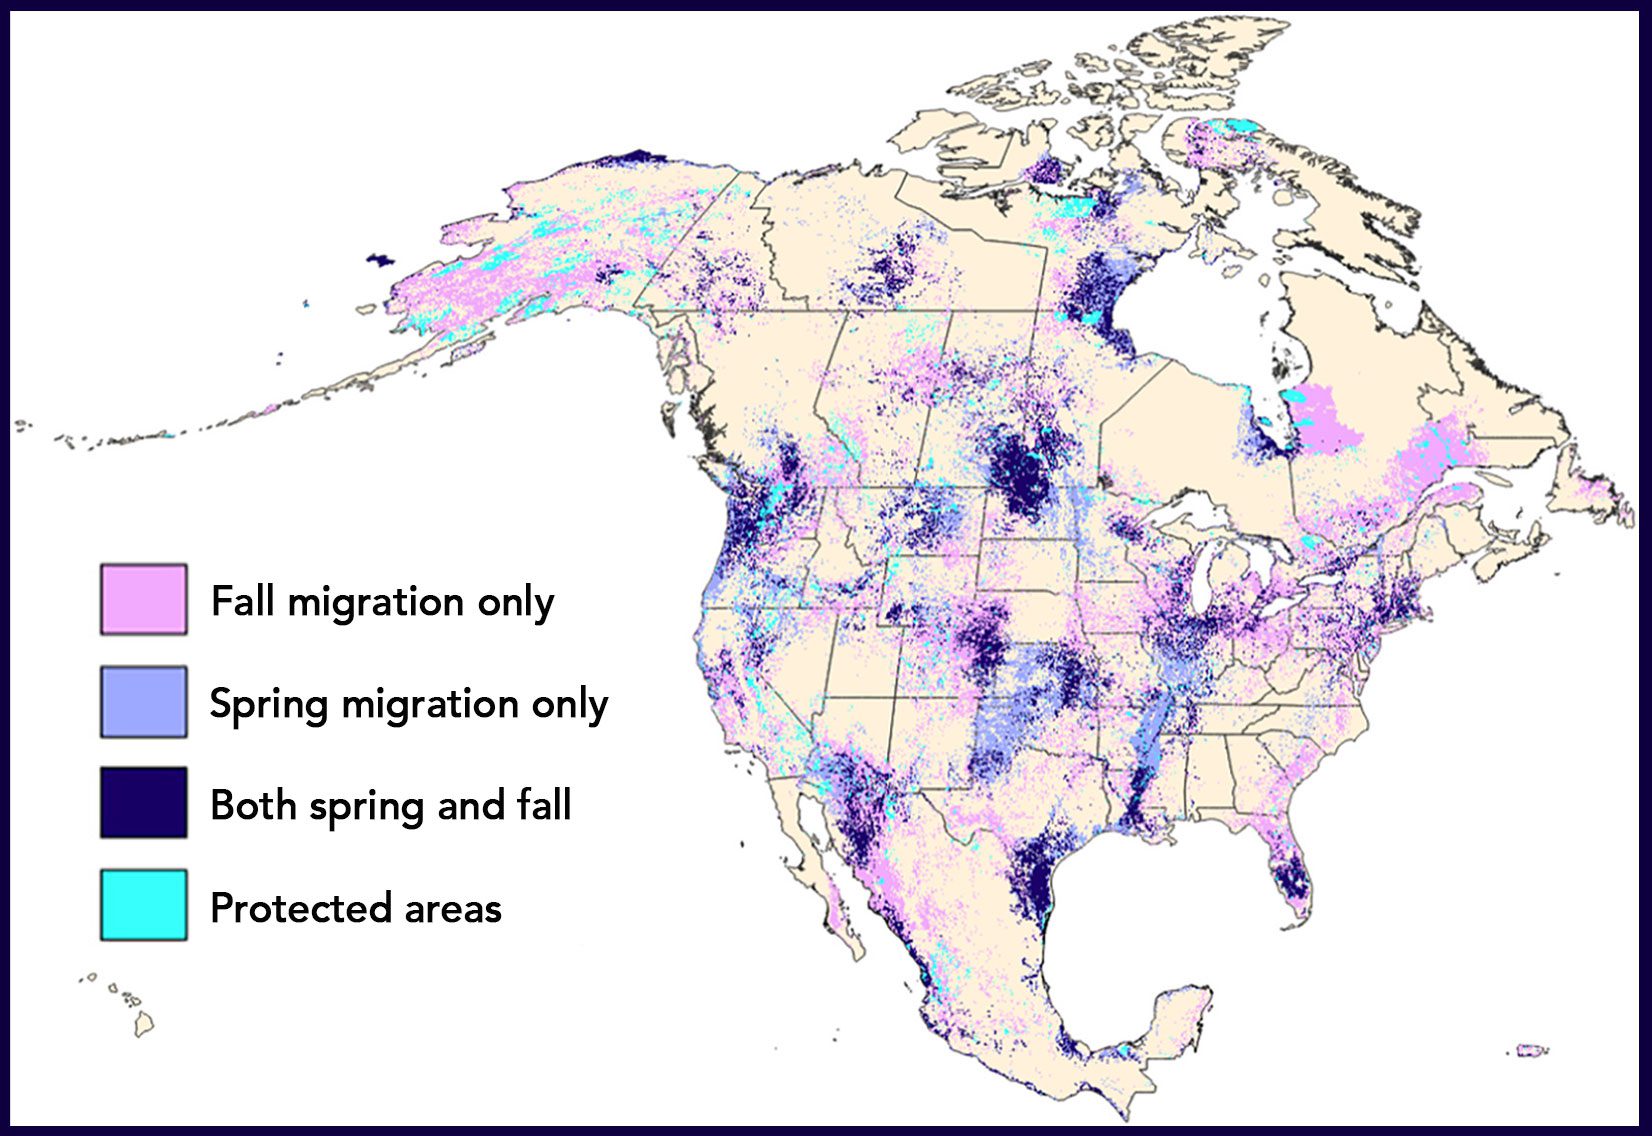 Migration stopover map. Source: “Integrating season-specific needs of migratory and resident birds in conservation planning” Biological Conservation, Dec. 2020.